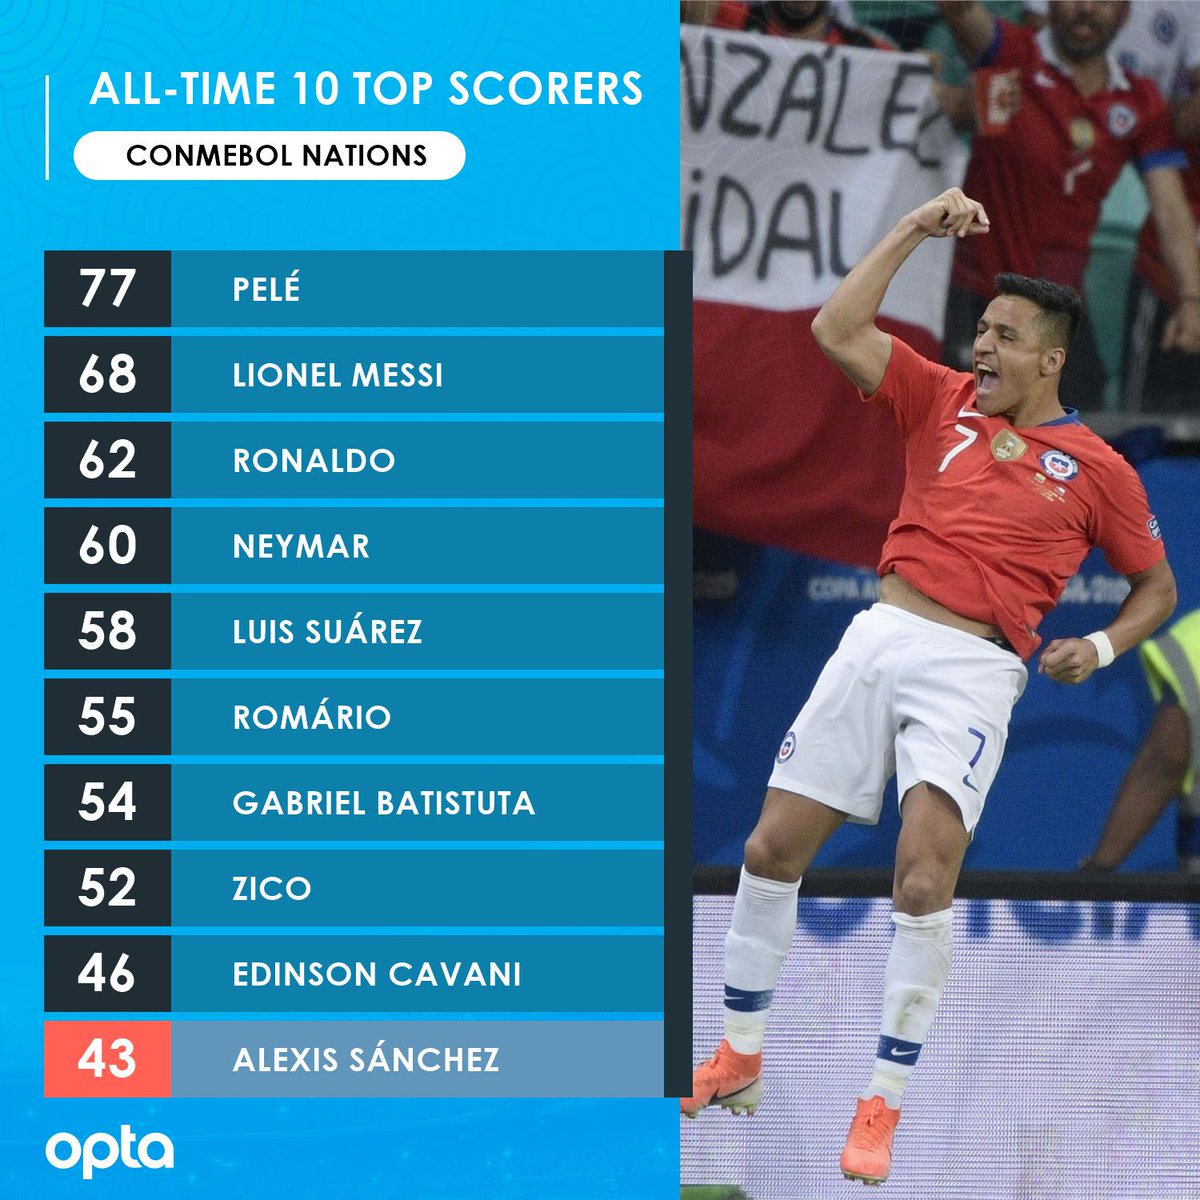 Optajavier 43 Apart From Being The 10th South American Player With The Most Caps In History Alexis Sanchez Is The 10th All Time Top Scorer Among South American Nations